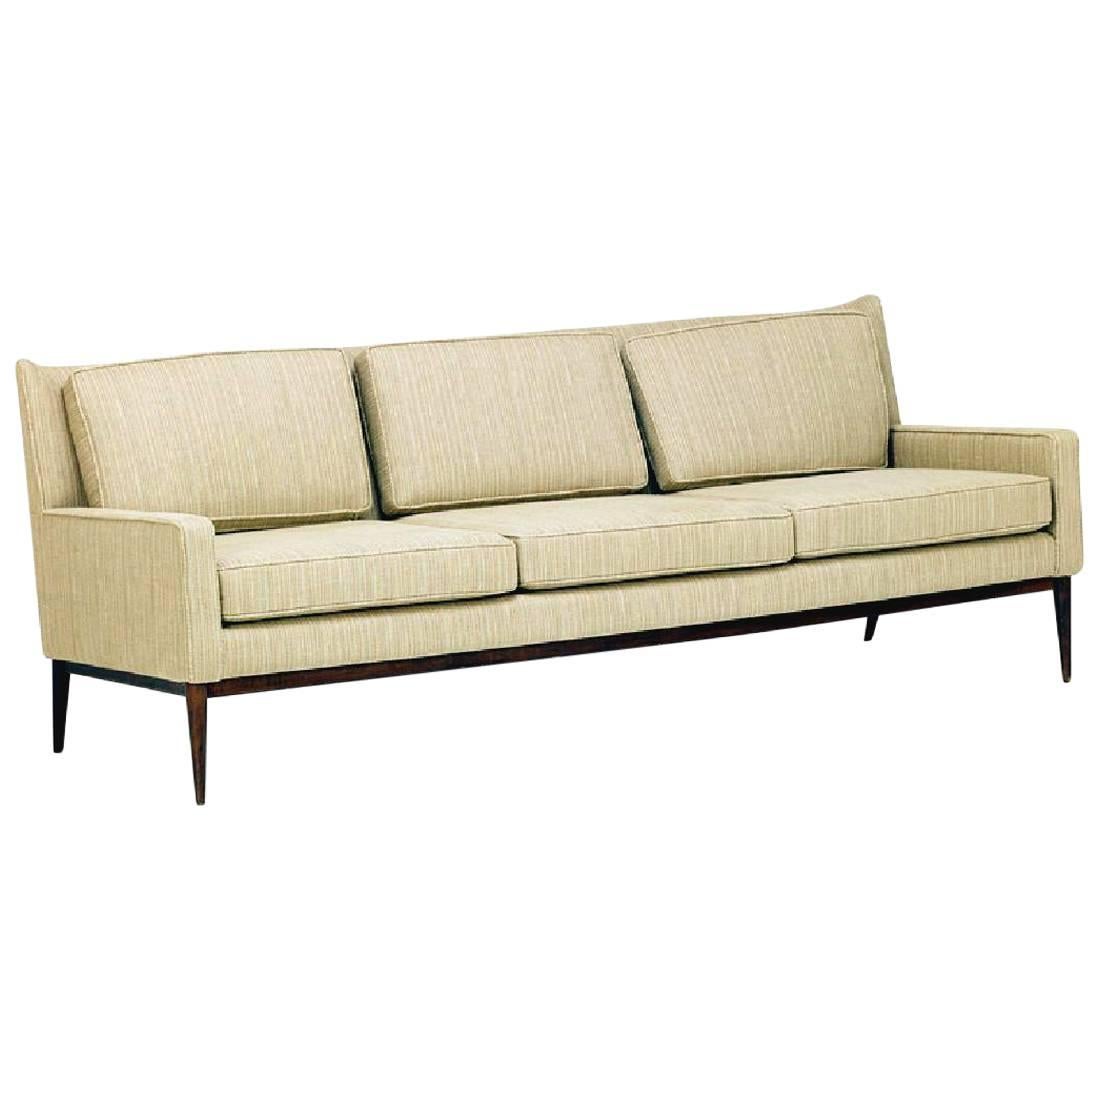 A midcentury three-seat sofa by Paul McCobb for Directional, model 1301. A very clean look with a slight wing back. It features three removable back and seat cushions on a conforming upholstered frame with dark wood base. Attractive 